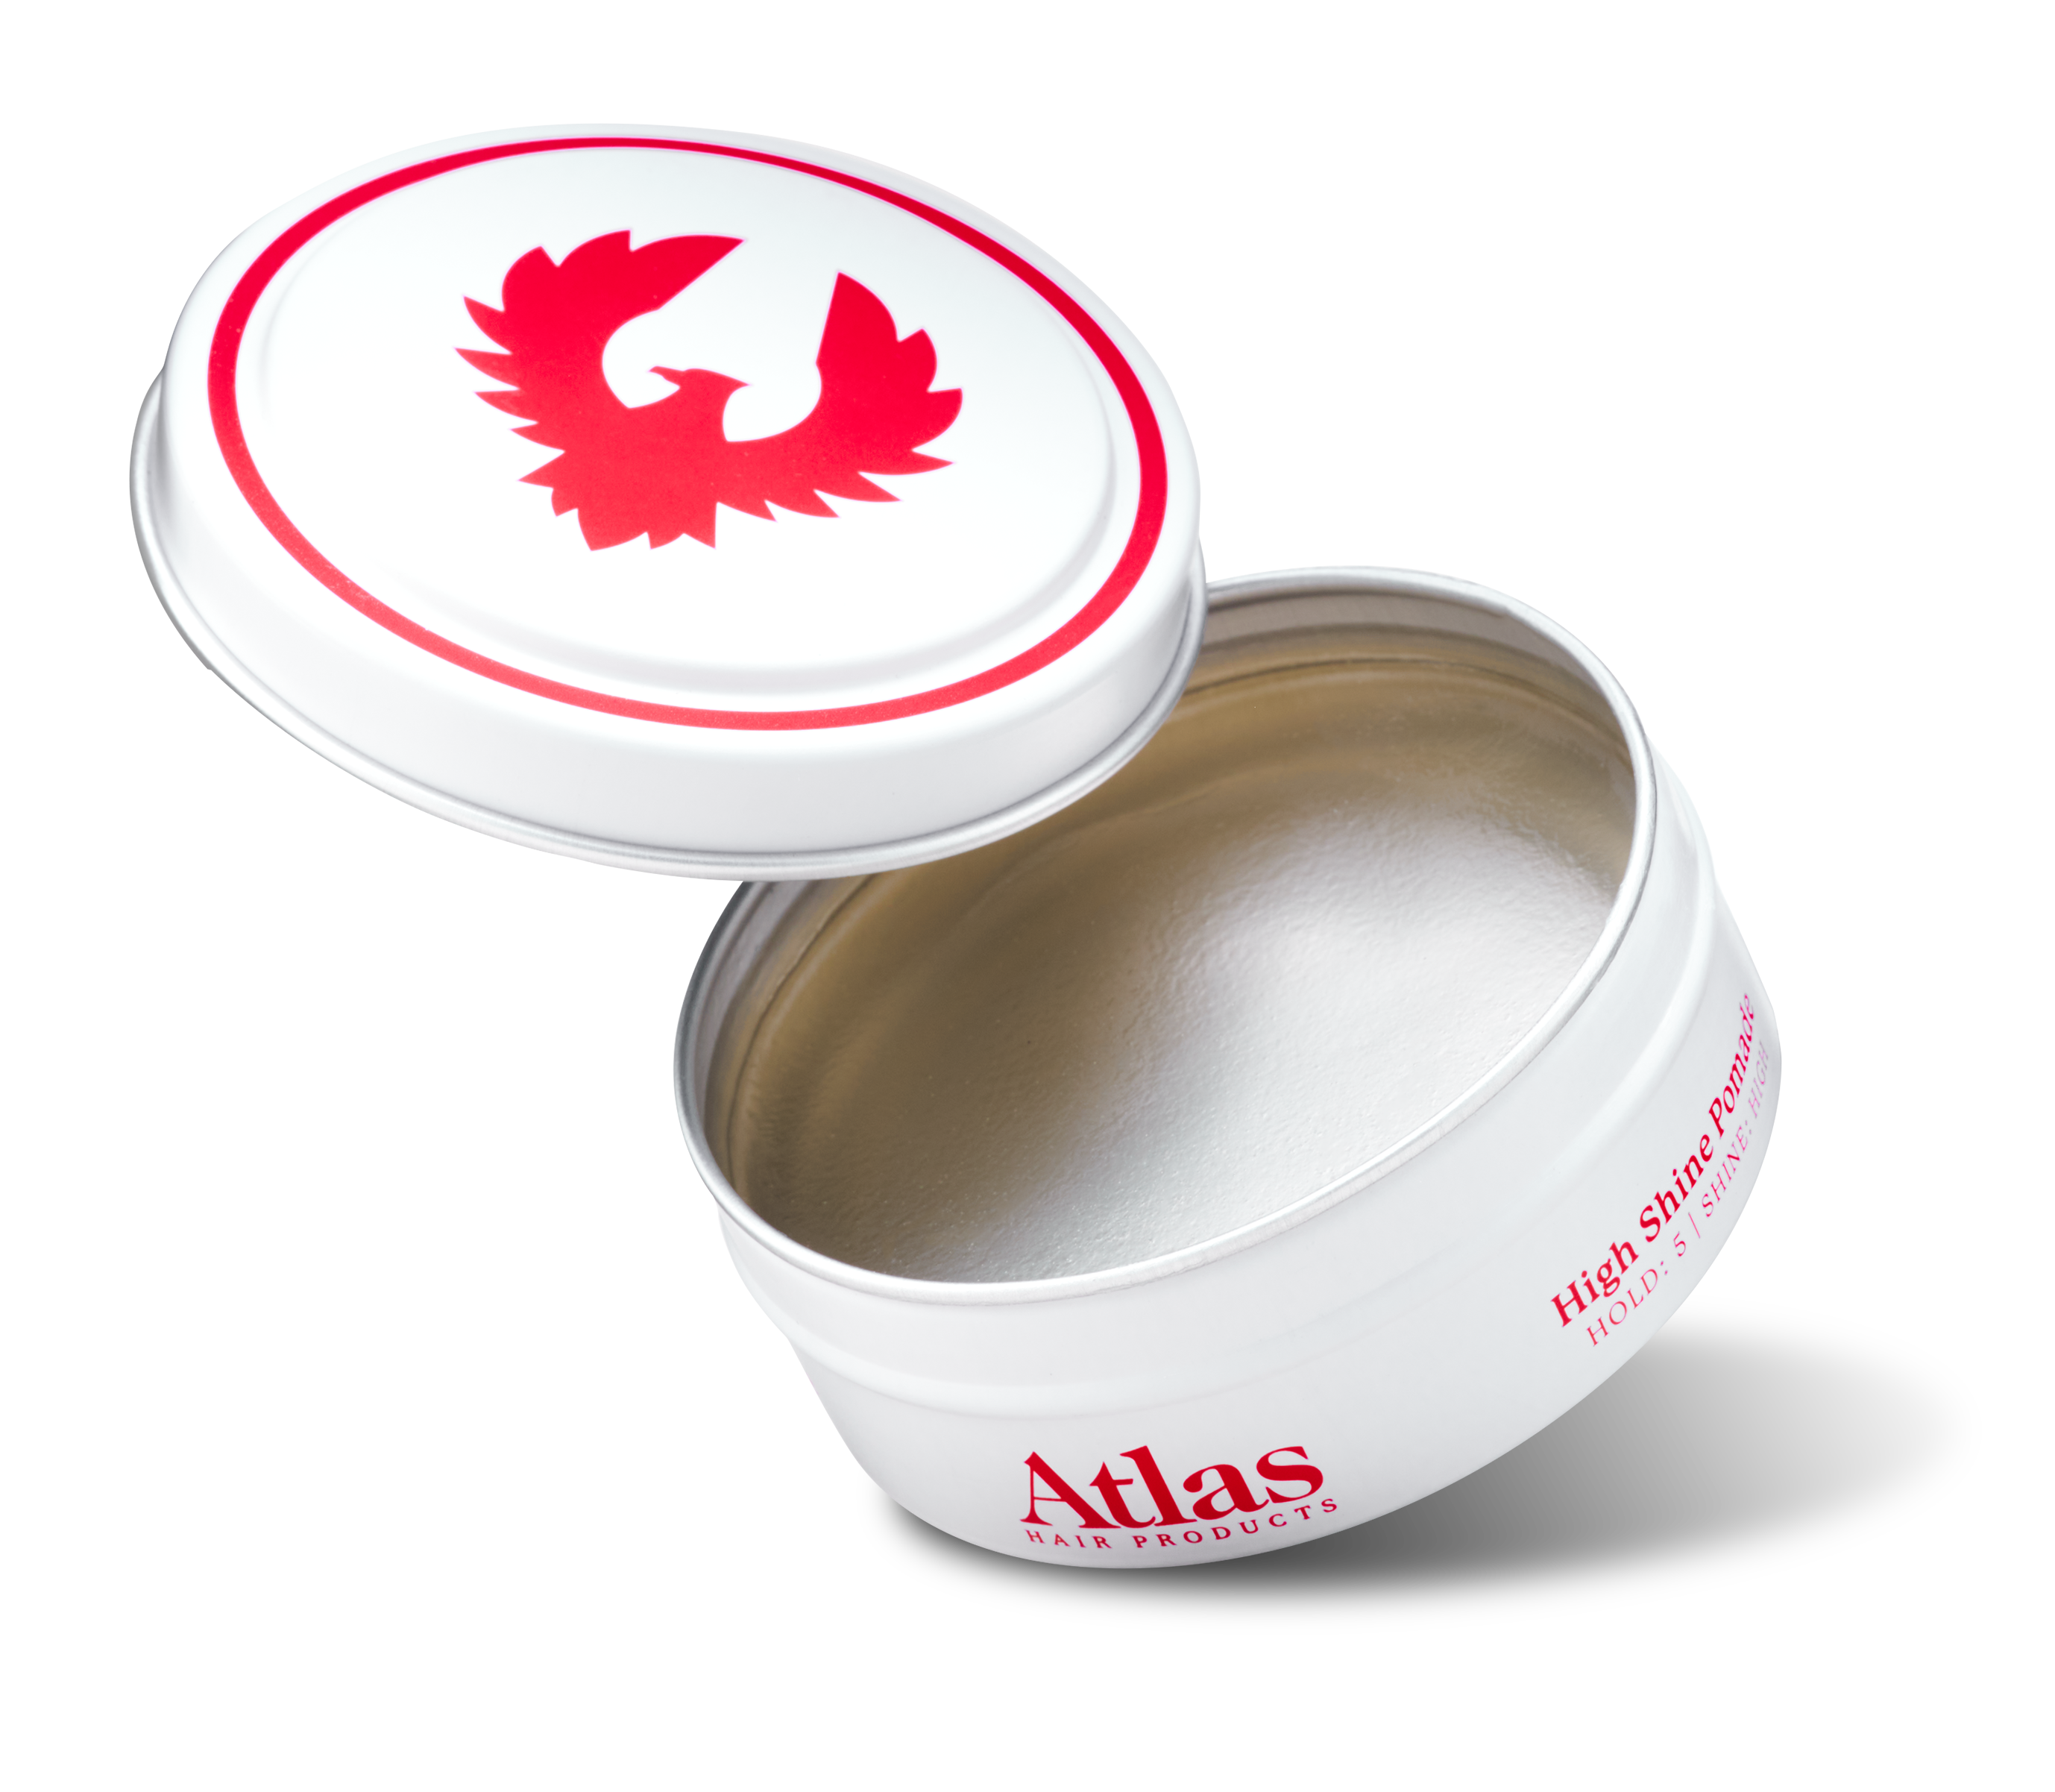 Open can of Atlas High Shine Pomade hair styling product for men.